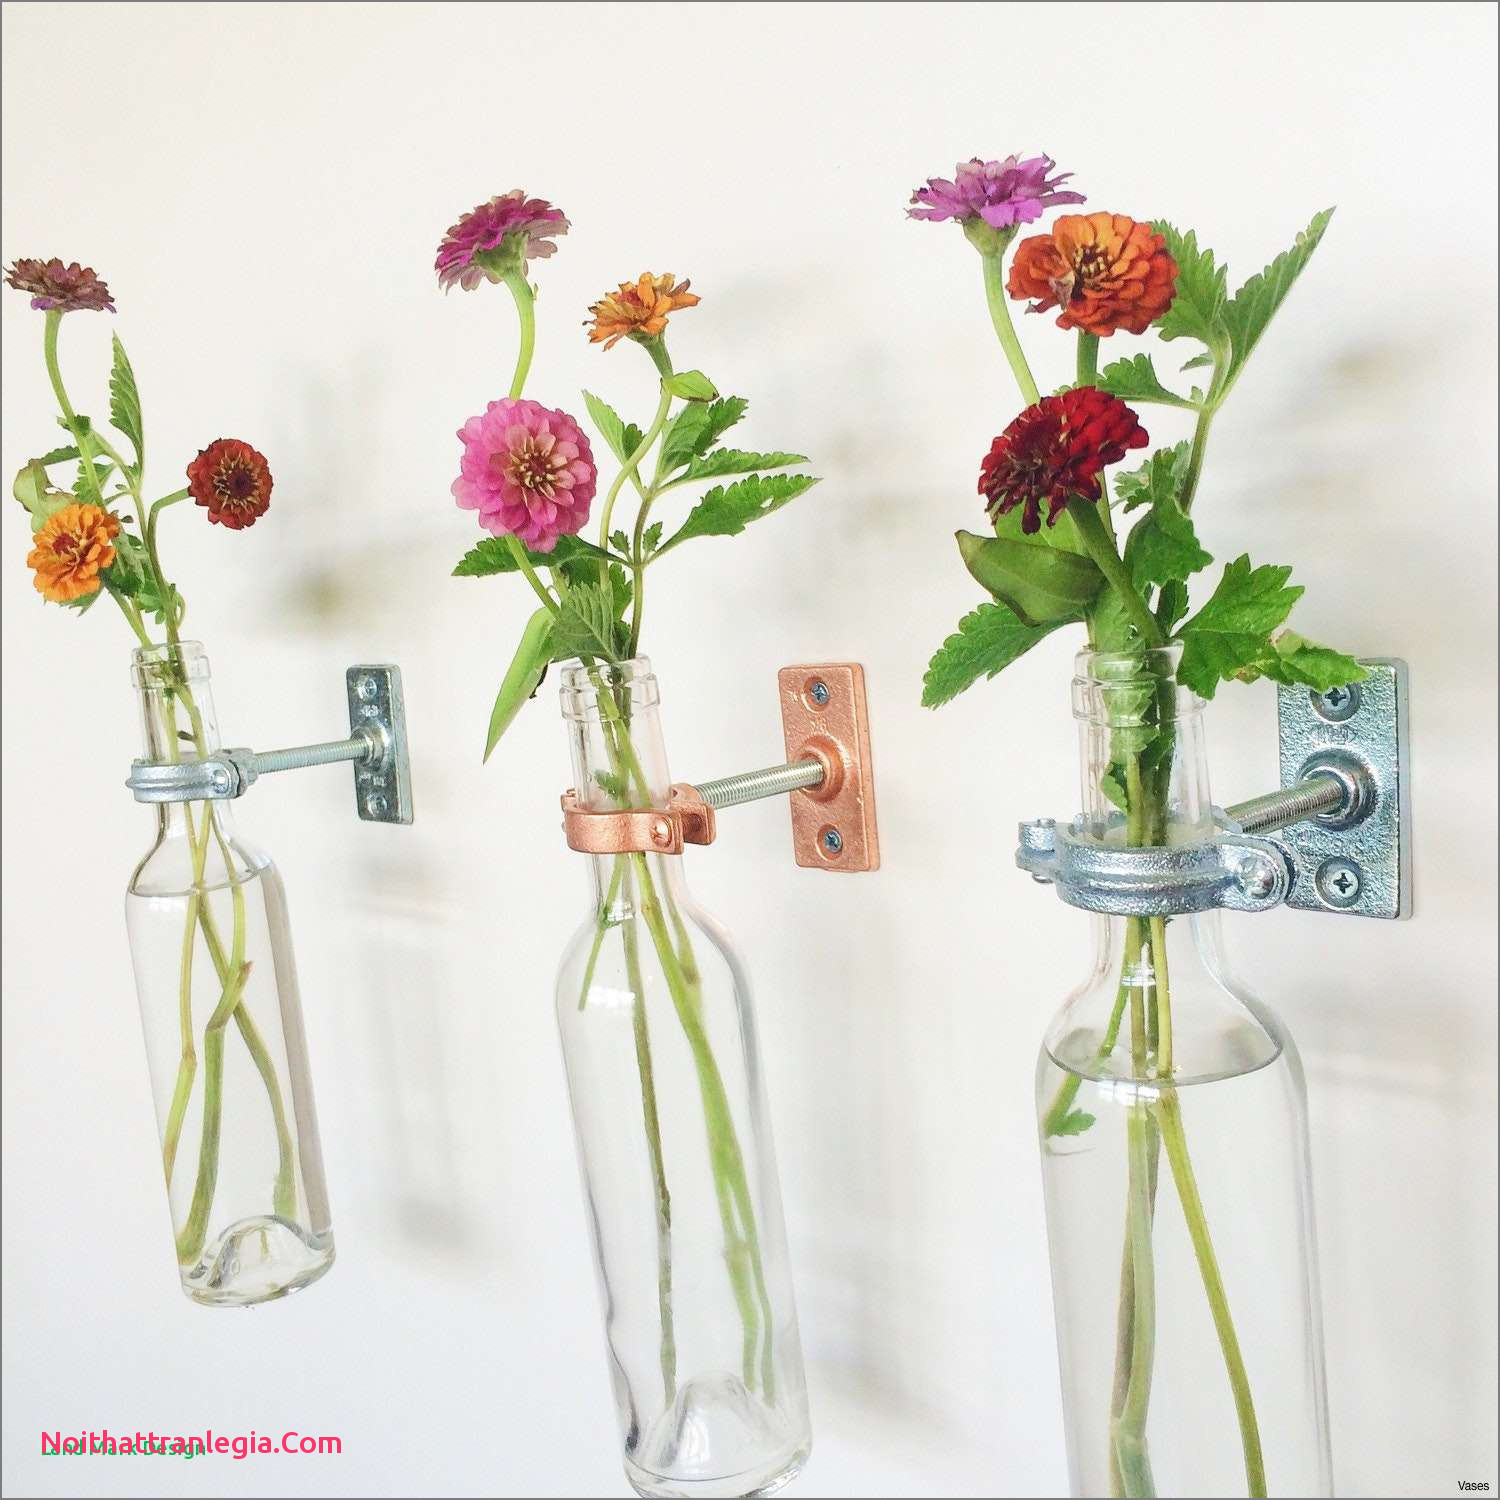 14 Lovable Can You Spray Paint Ceramic Vases 2024 free download can you spray paint ceramic vases of 20 how to make mercury glass vases noithattranlegia vases design with regard to hanging glass vase diy flower vases design hanging glass vase s metal wal